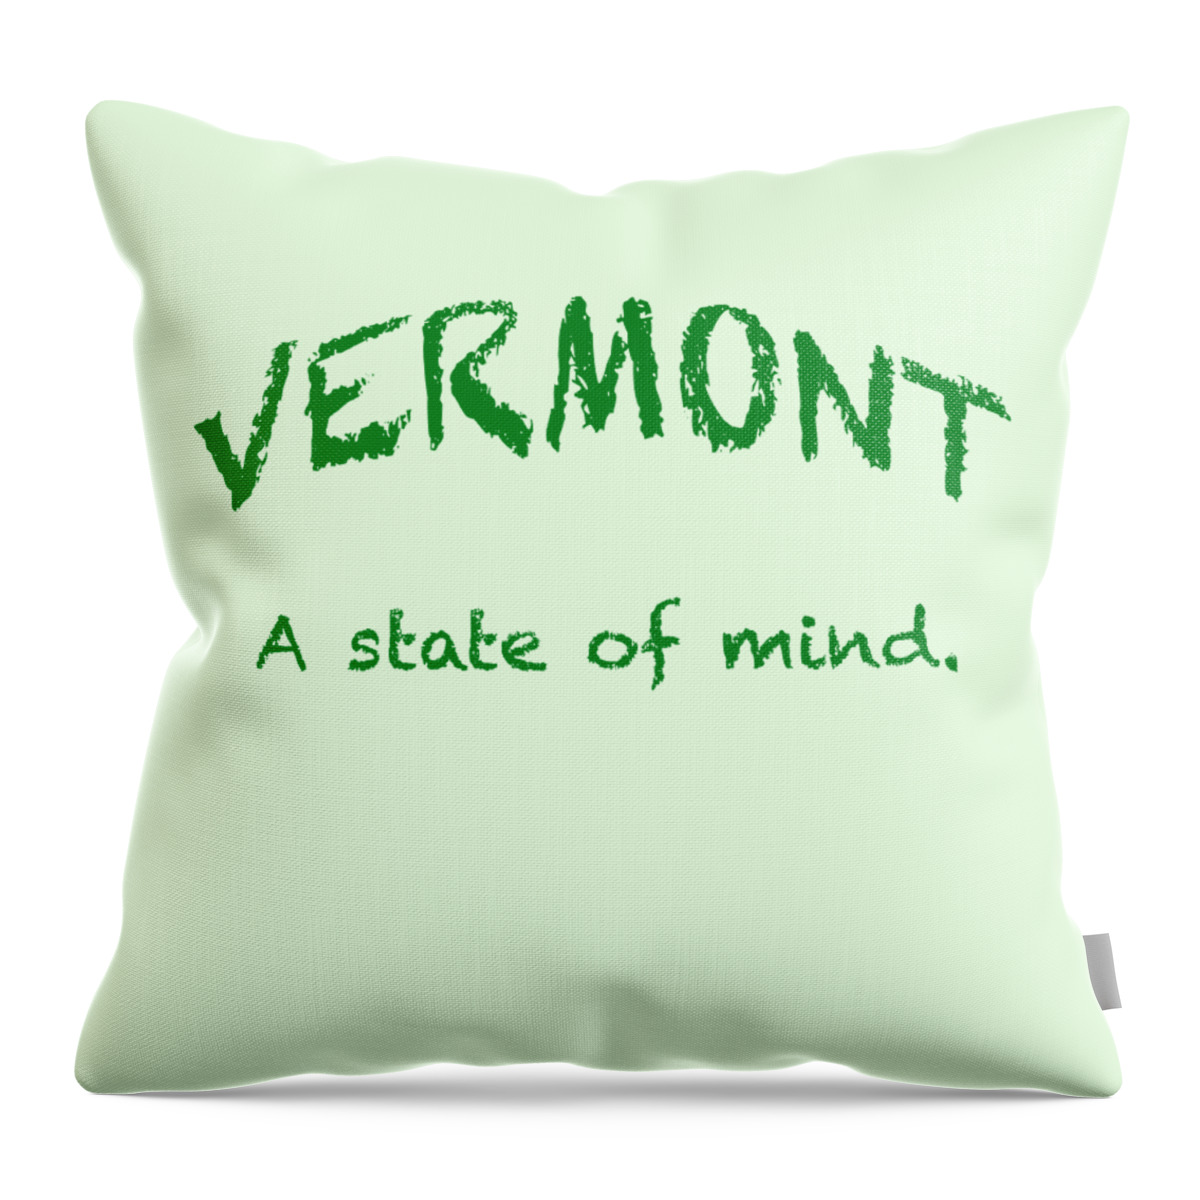 Vermont Throw Pillow featuring the digital art Vermont, A State of Mind by George Robinson